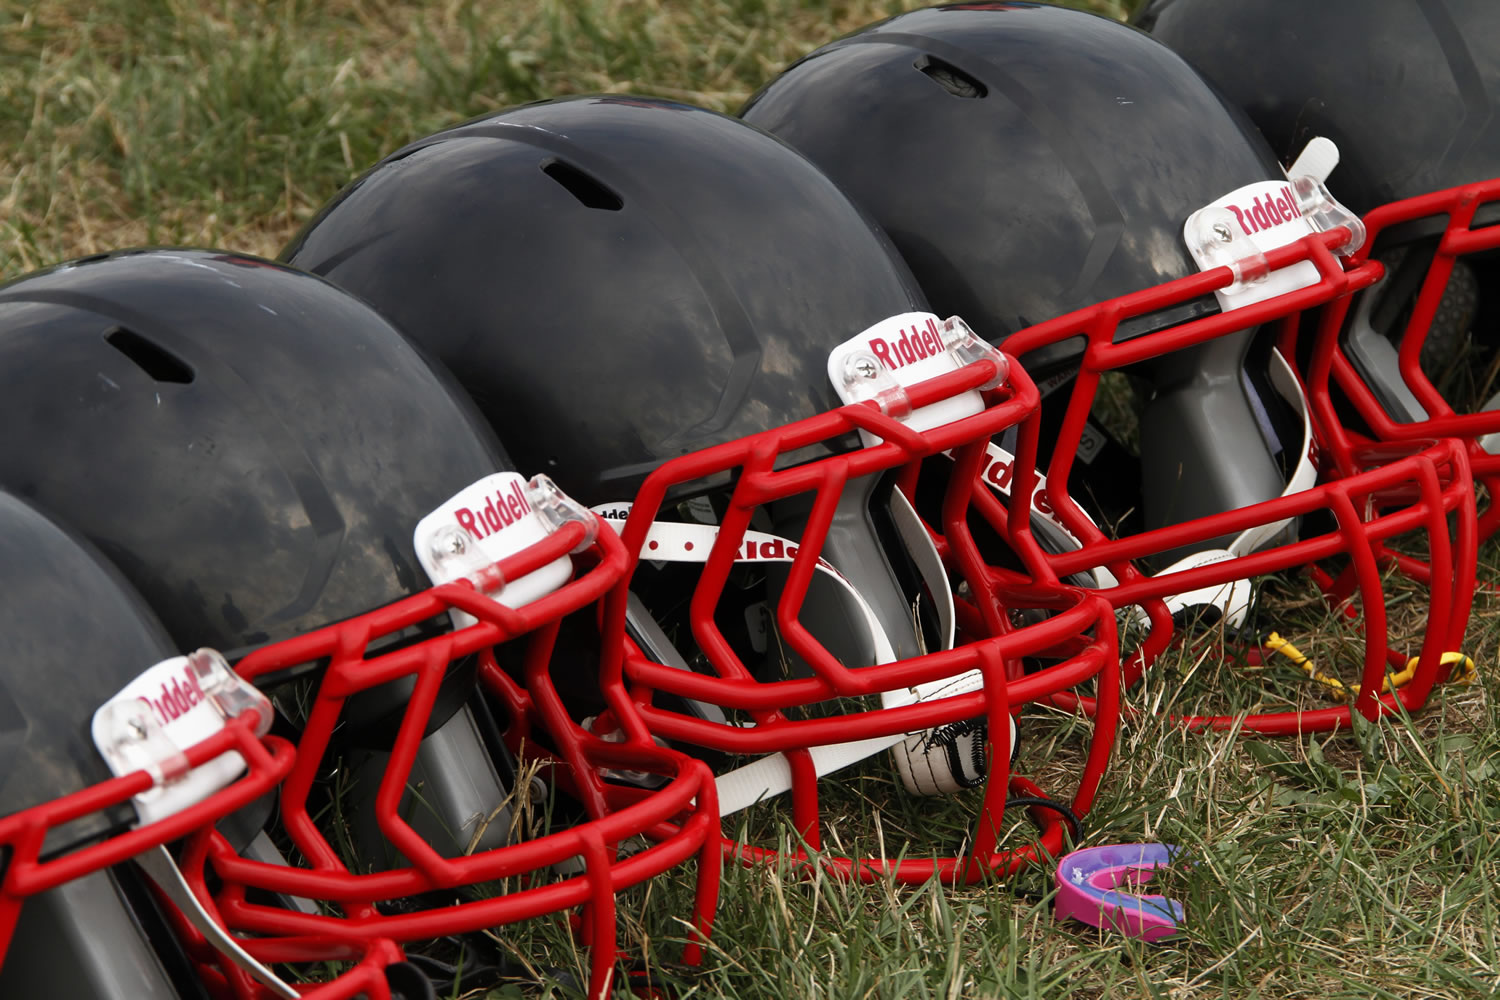 New football helmets that were given to a group of youth football players from the Akron Parents Pee Wee Football League in Akron, Ohio.